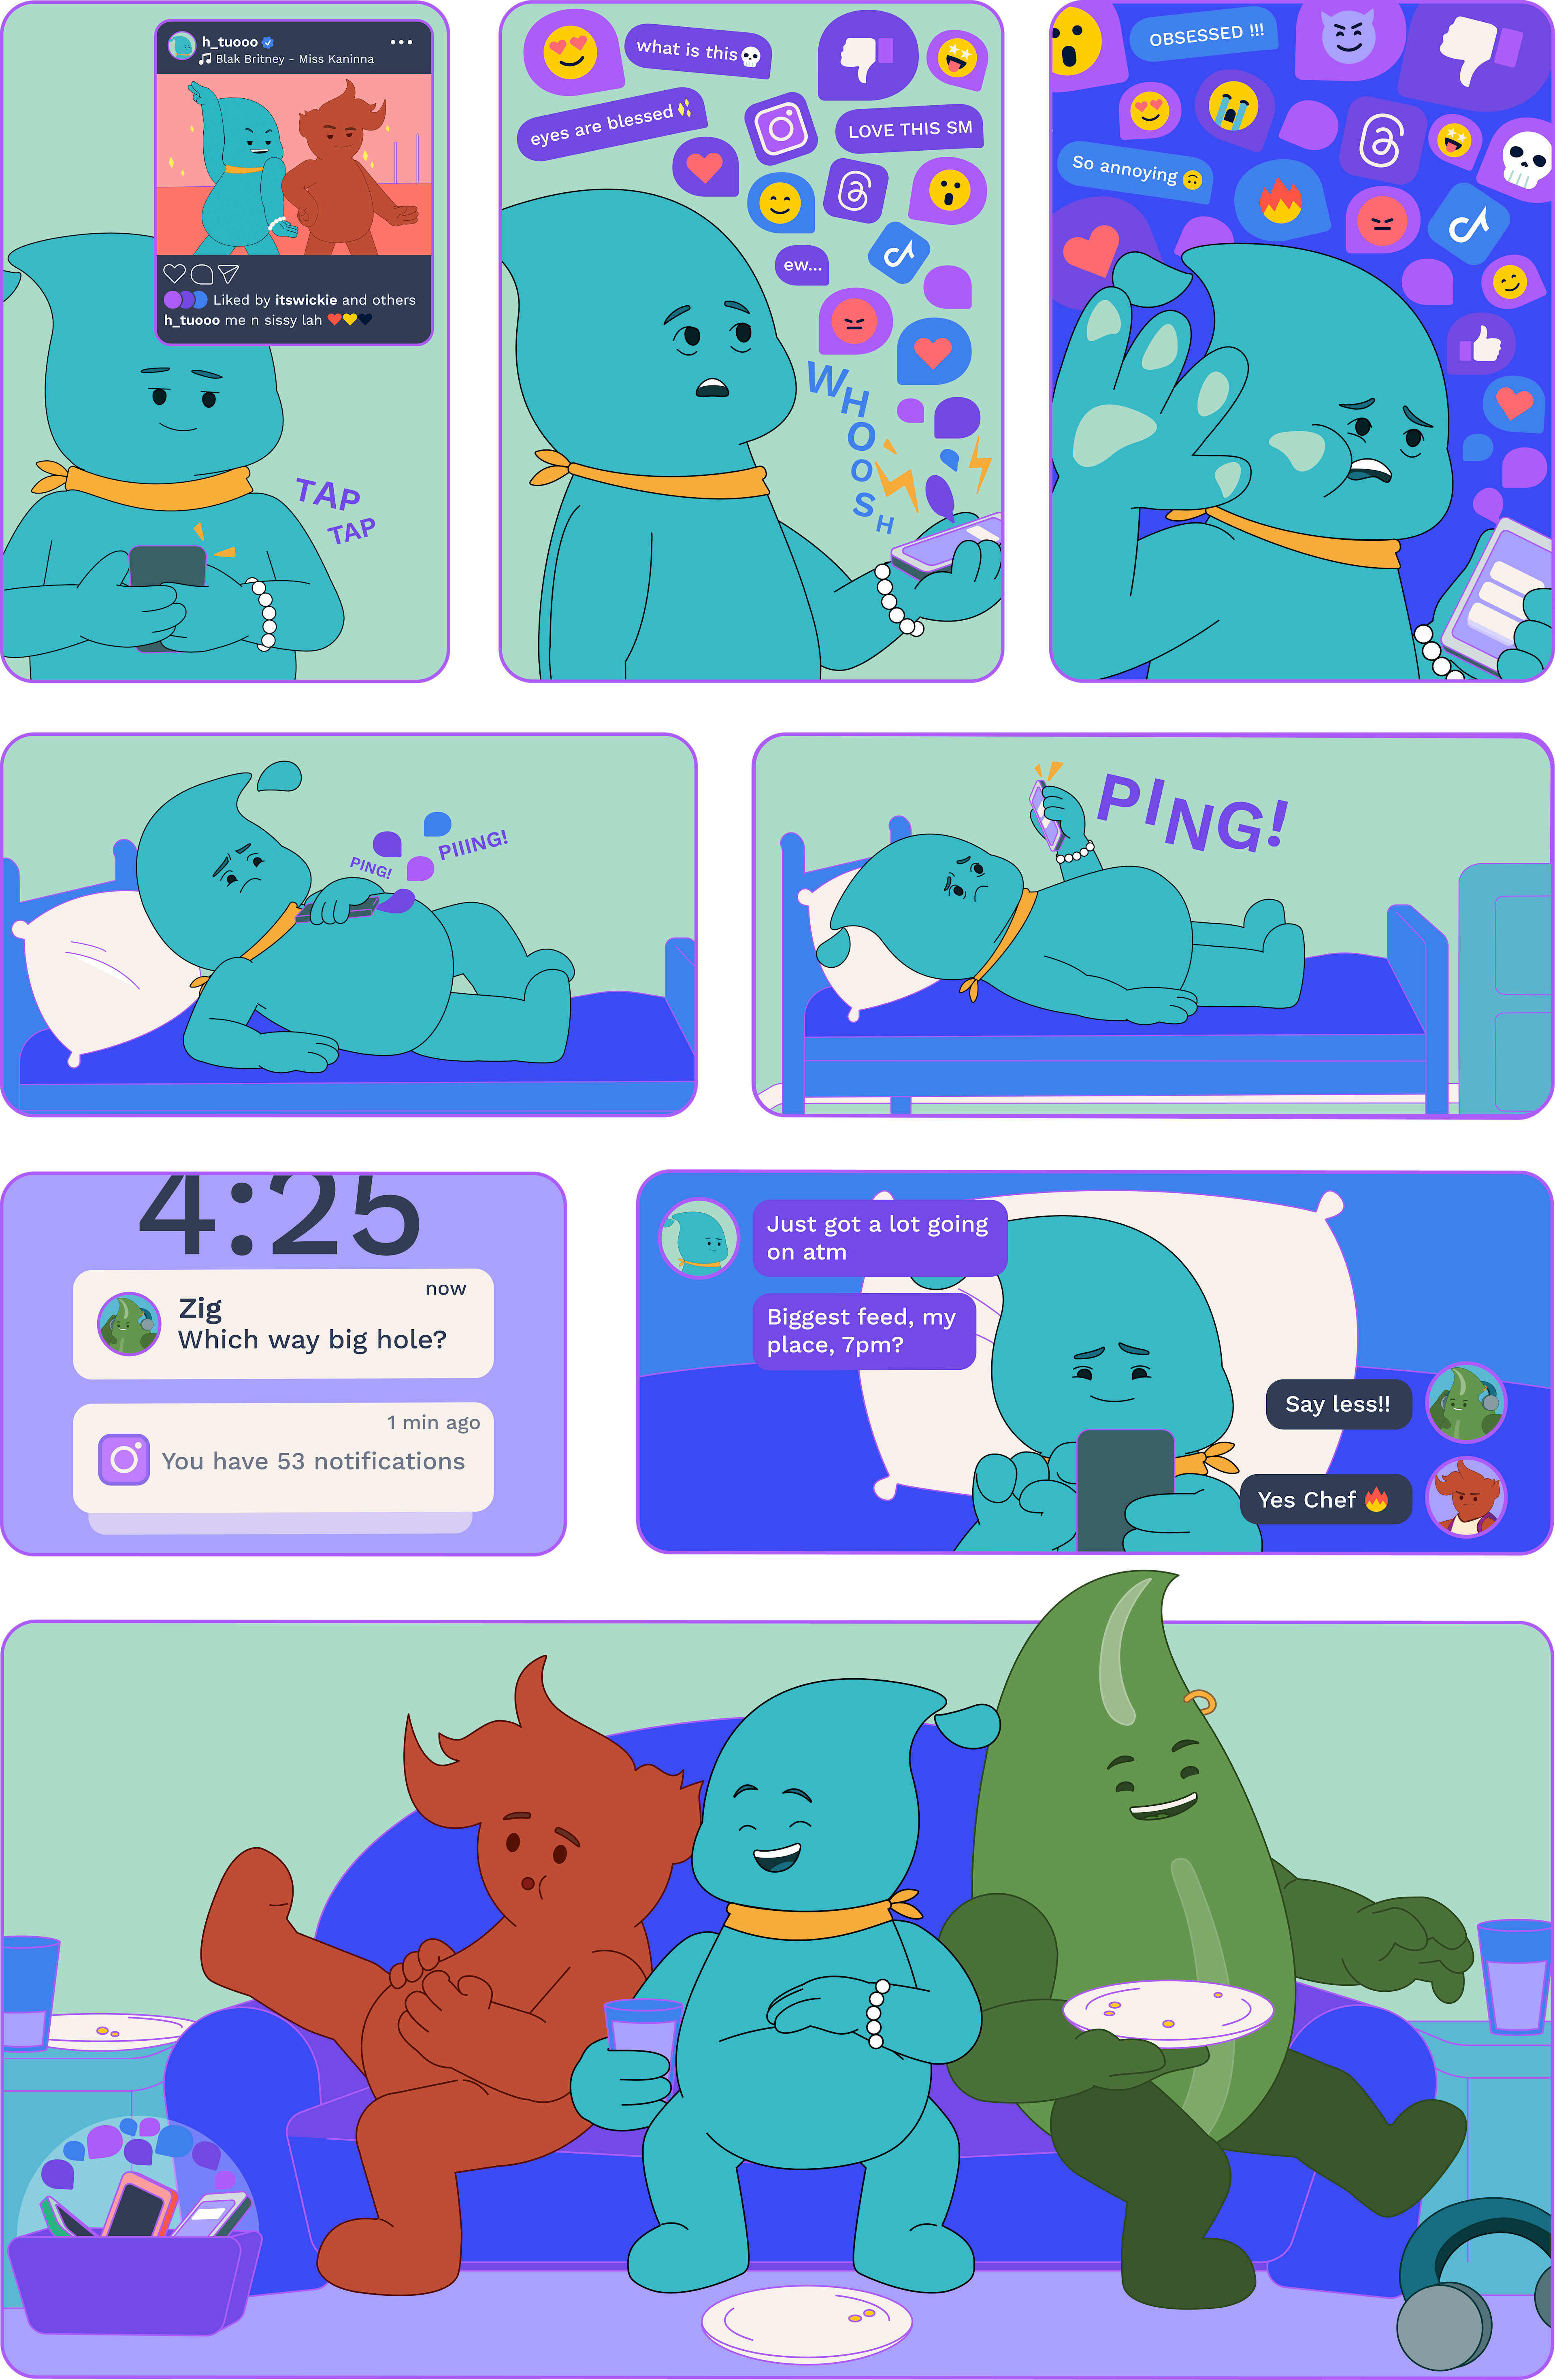 A comic featuring Tuo, an elemental water character. In the comic Tuo posts an image online and gets overwhelmed with comments, both positive and negative. They decide to invite their friends over to switch off from the digital world. The final panel is of Tuo sitting and having a laugh with their friends Zig and Wickie.